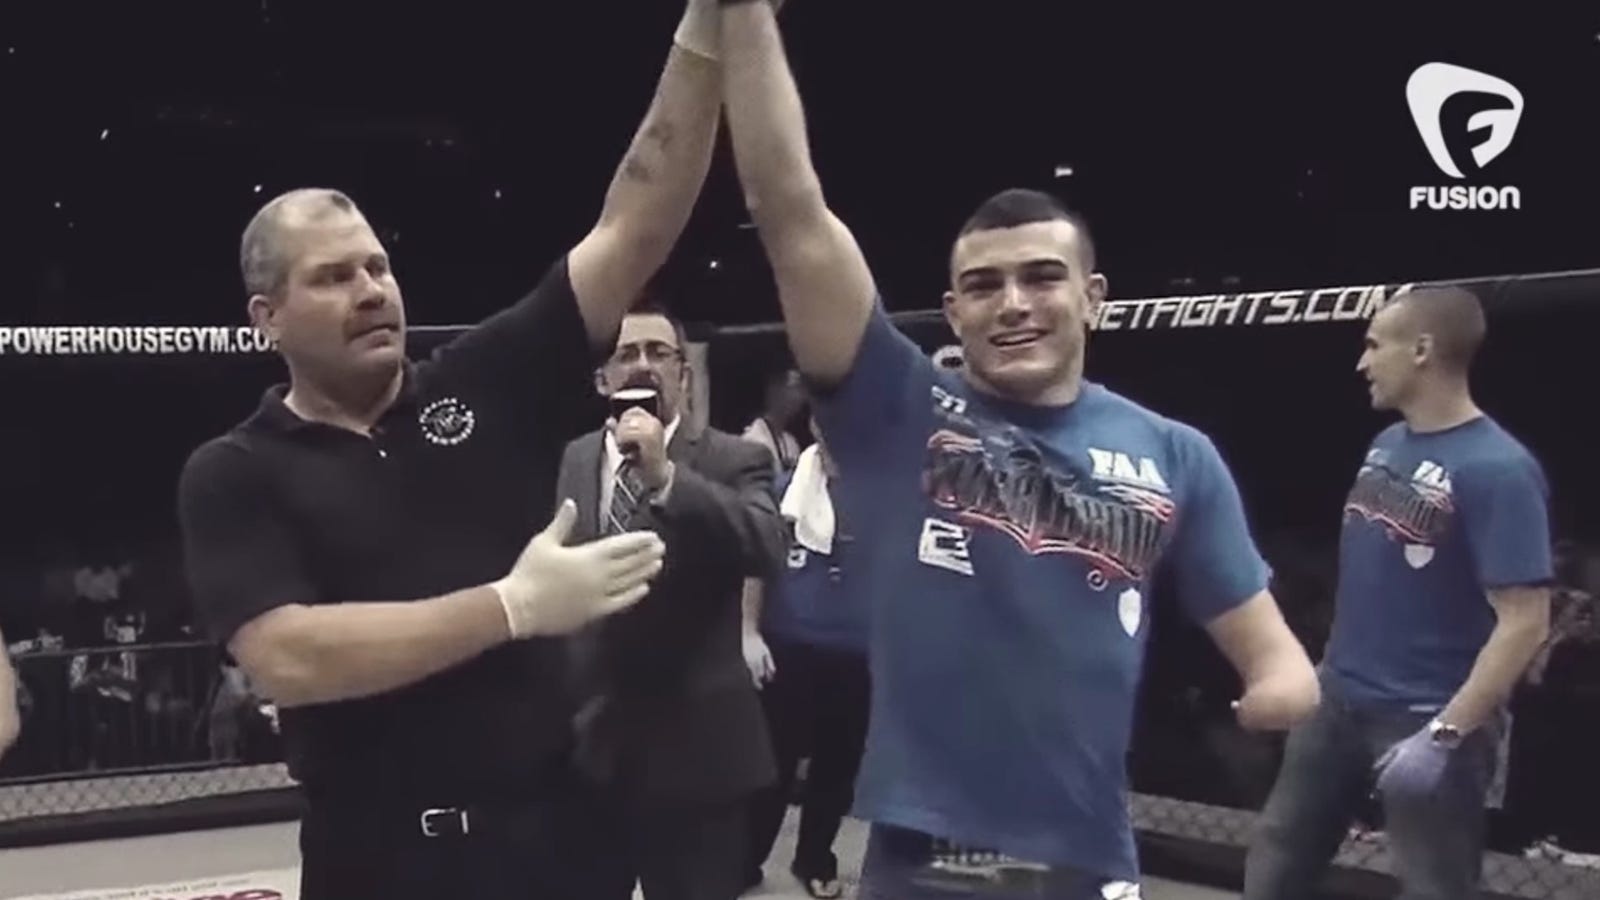 One-Handed MMA Pro Nick Newell Will Get A Shot At Making The UFC